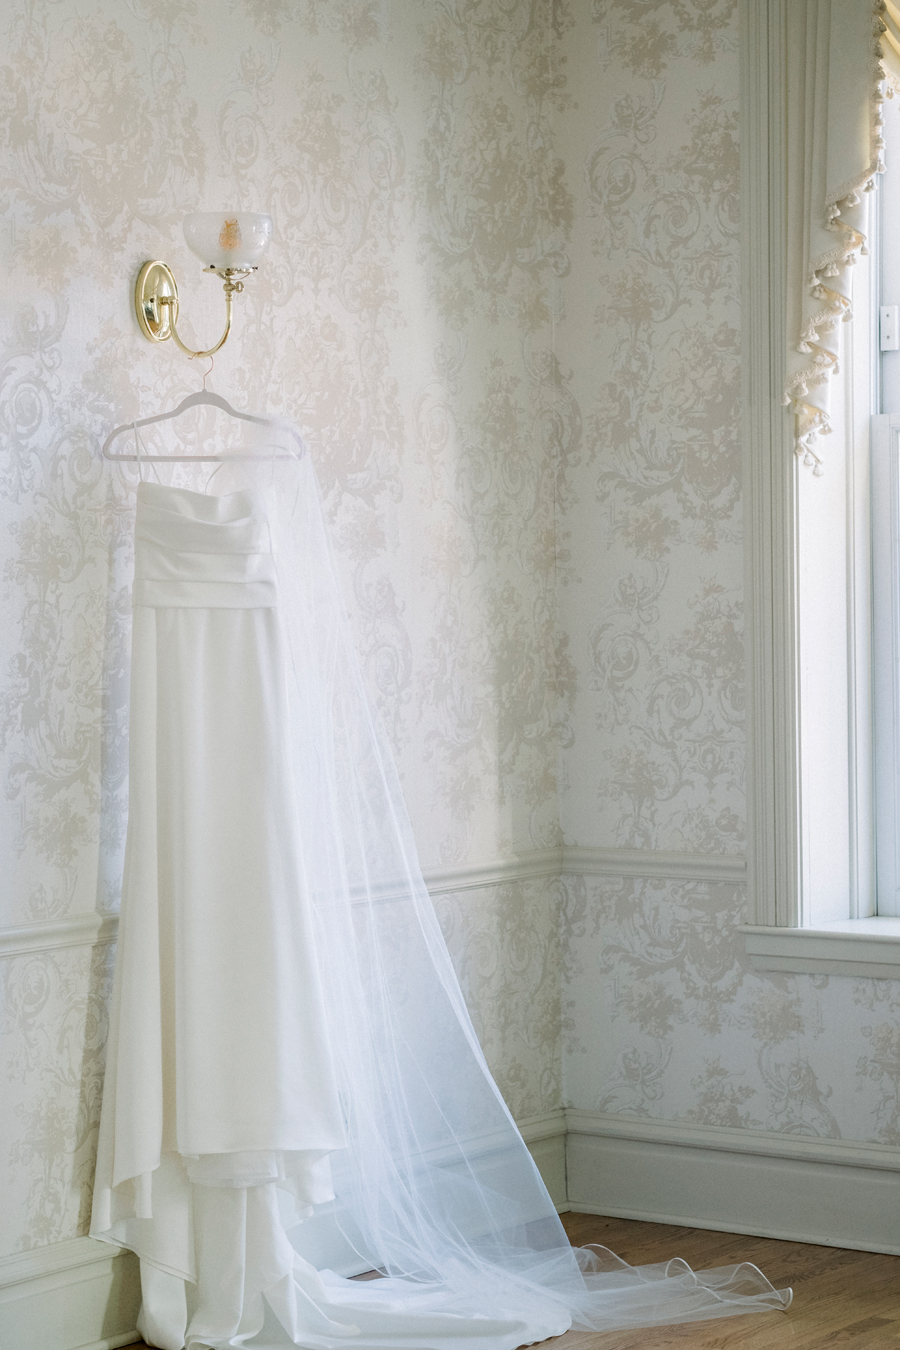 The bride's dress hangs on the wall ready for her elegant Stephens College wedding photographed by Columbia, Missouri wedding photographer Love Tree Studios.